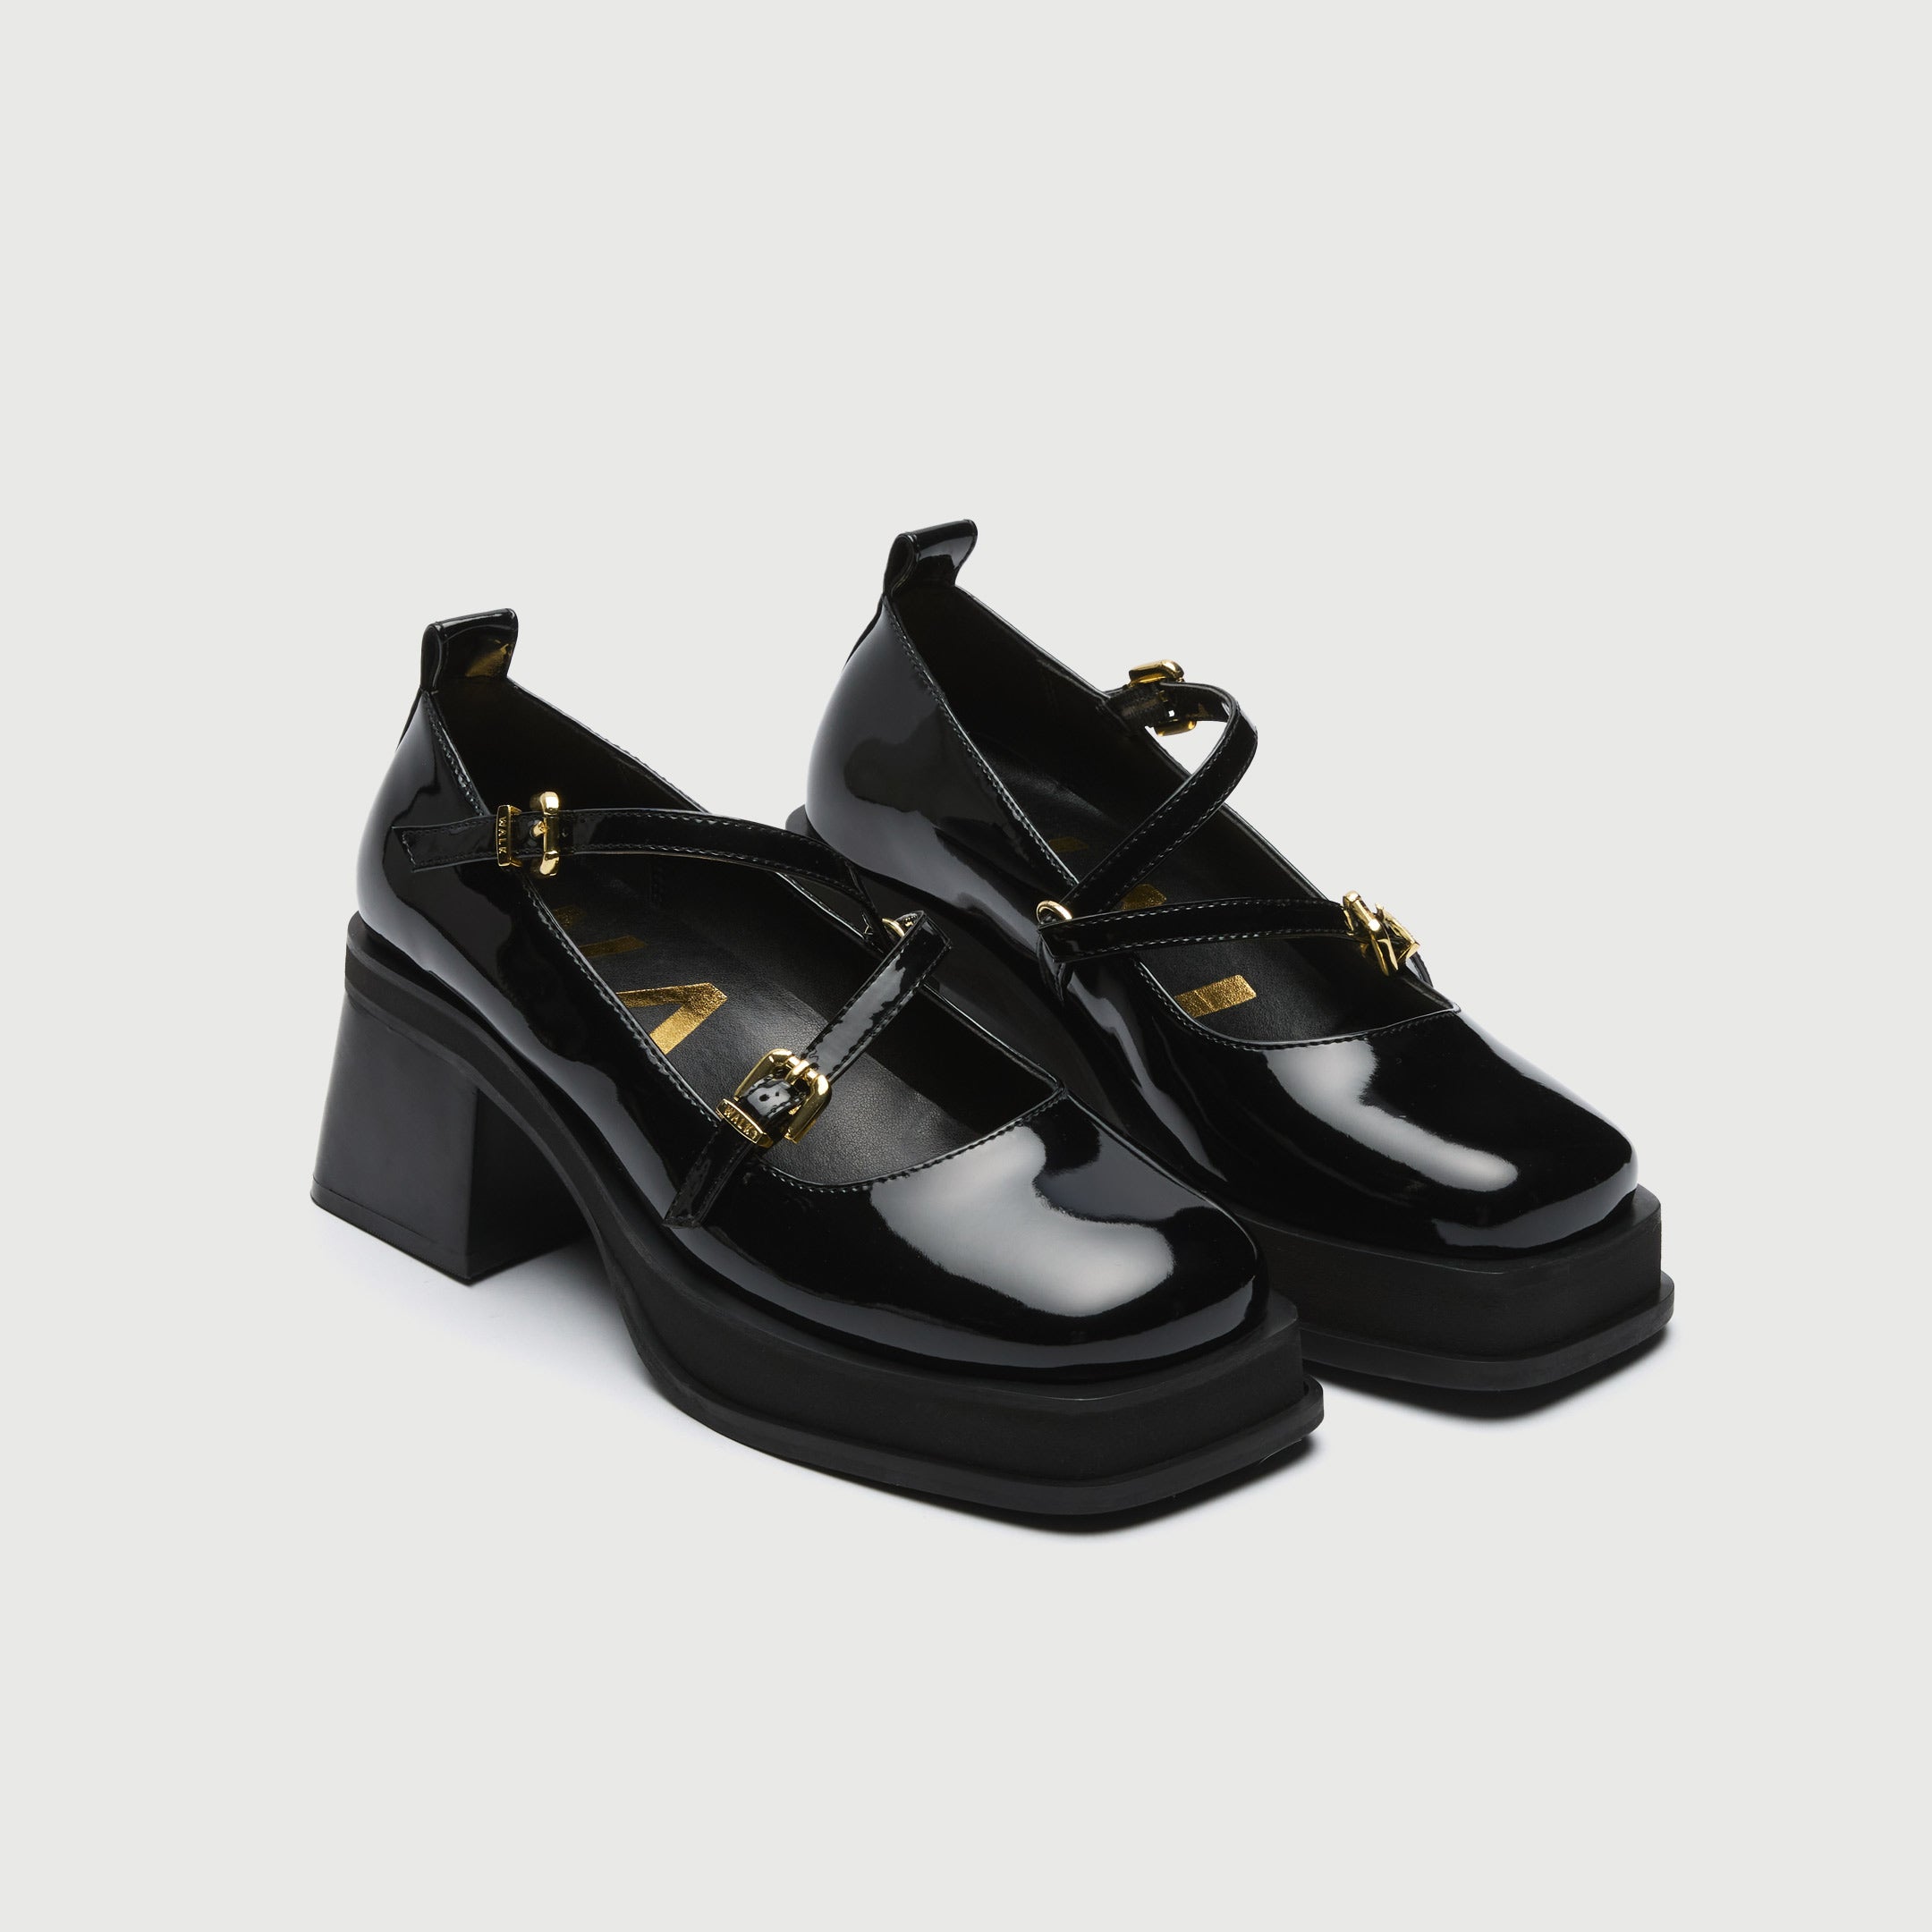 Walk London Womens Lily Ballerina in Patent Black Leather